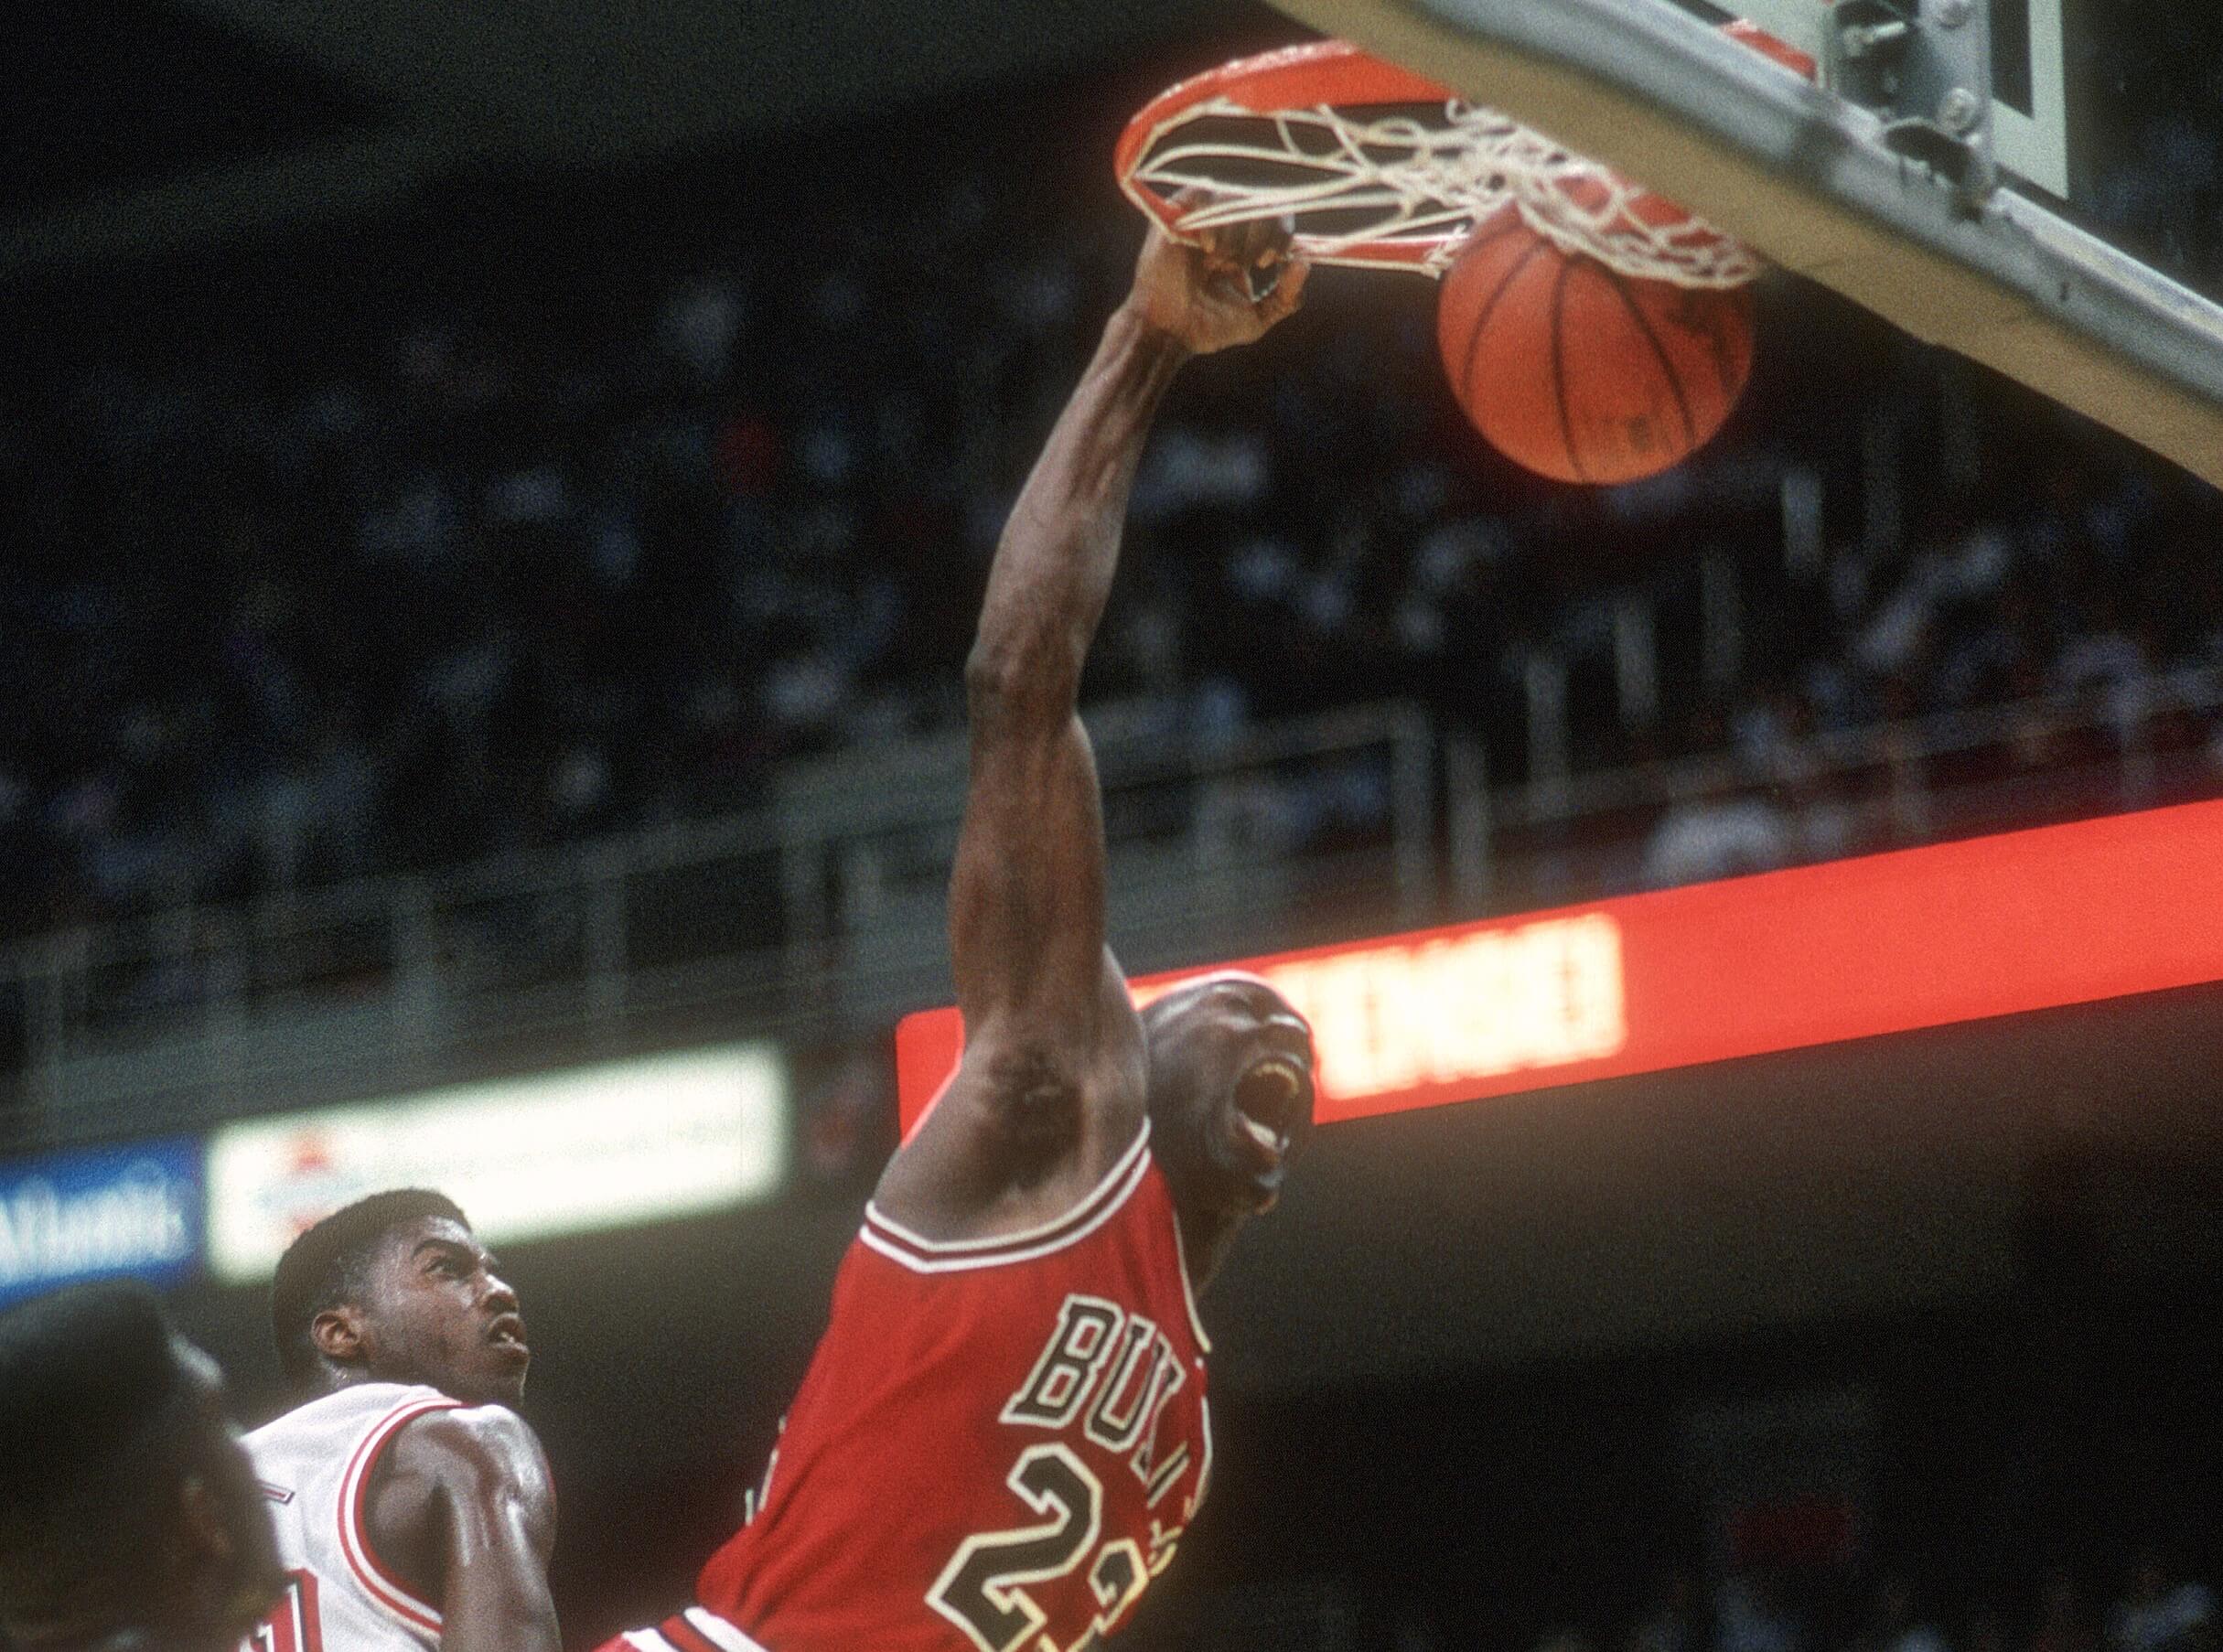 Remembering Jordan, Dominique Wilkins and the 1988 dunk contest